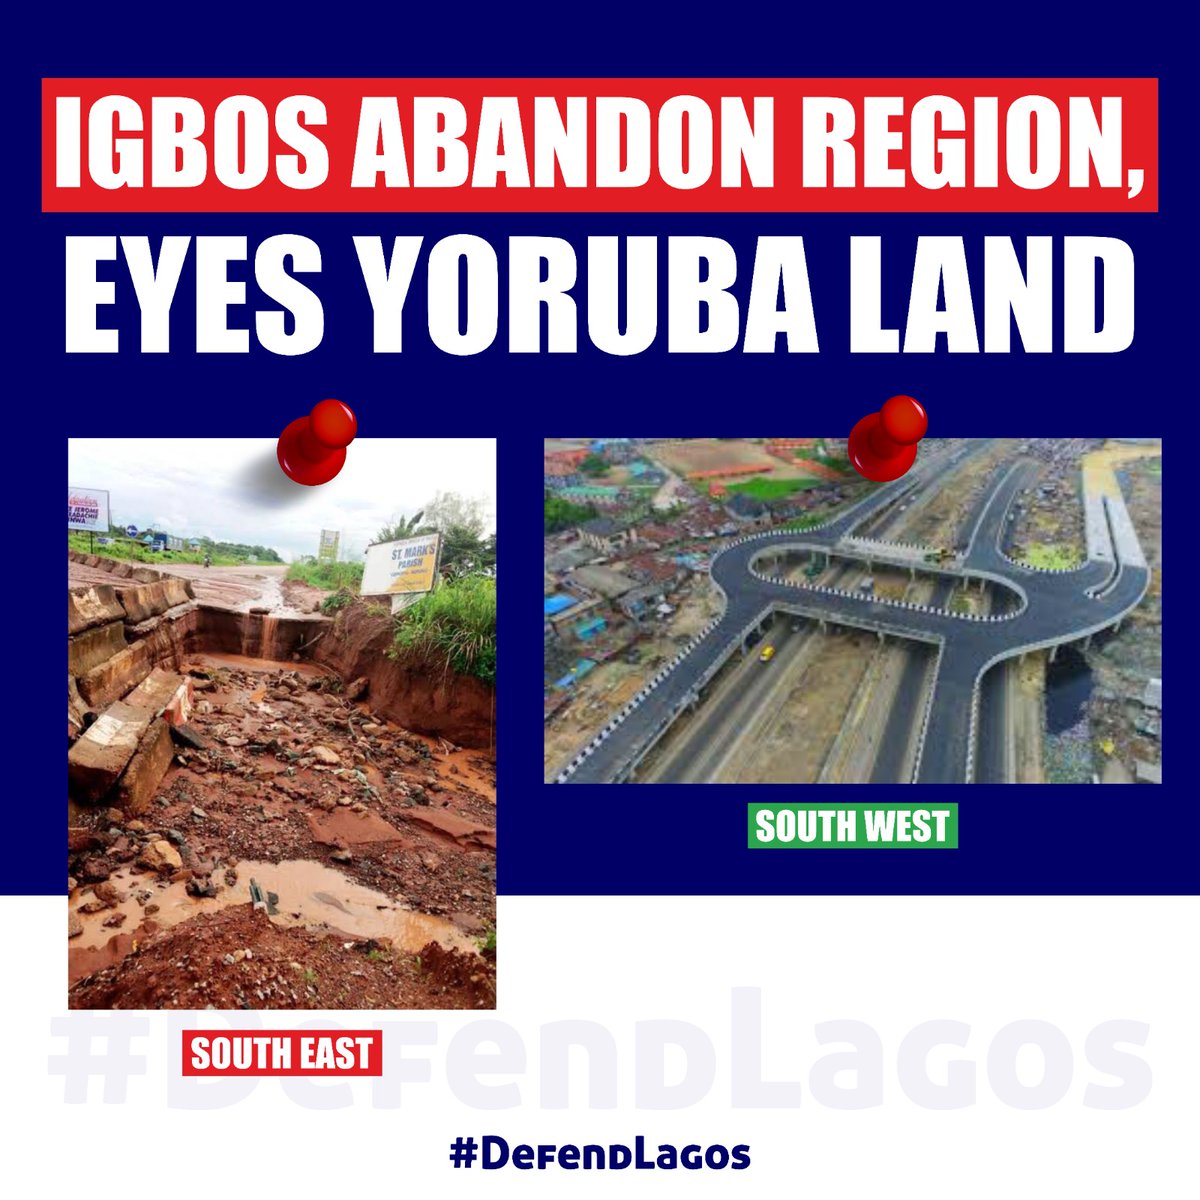 Umunnem, developing southeast should be the goal and not concentrating on the agenda of forceful possession of another man's land..

Lagosians, Defend your Lagos!
#DefendLagos